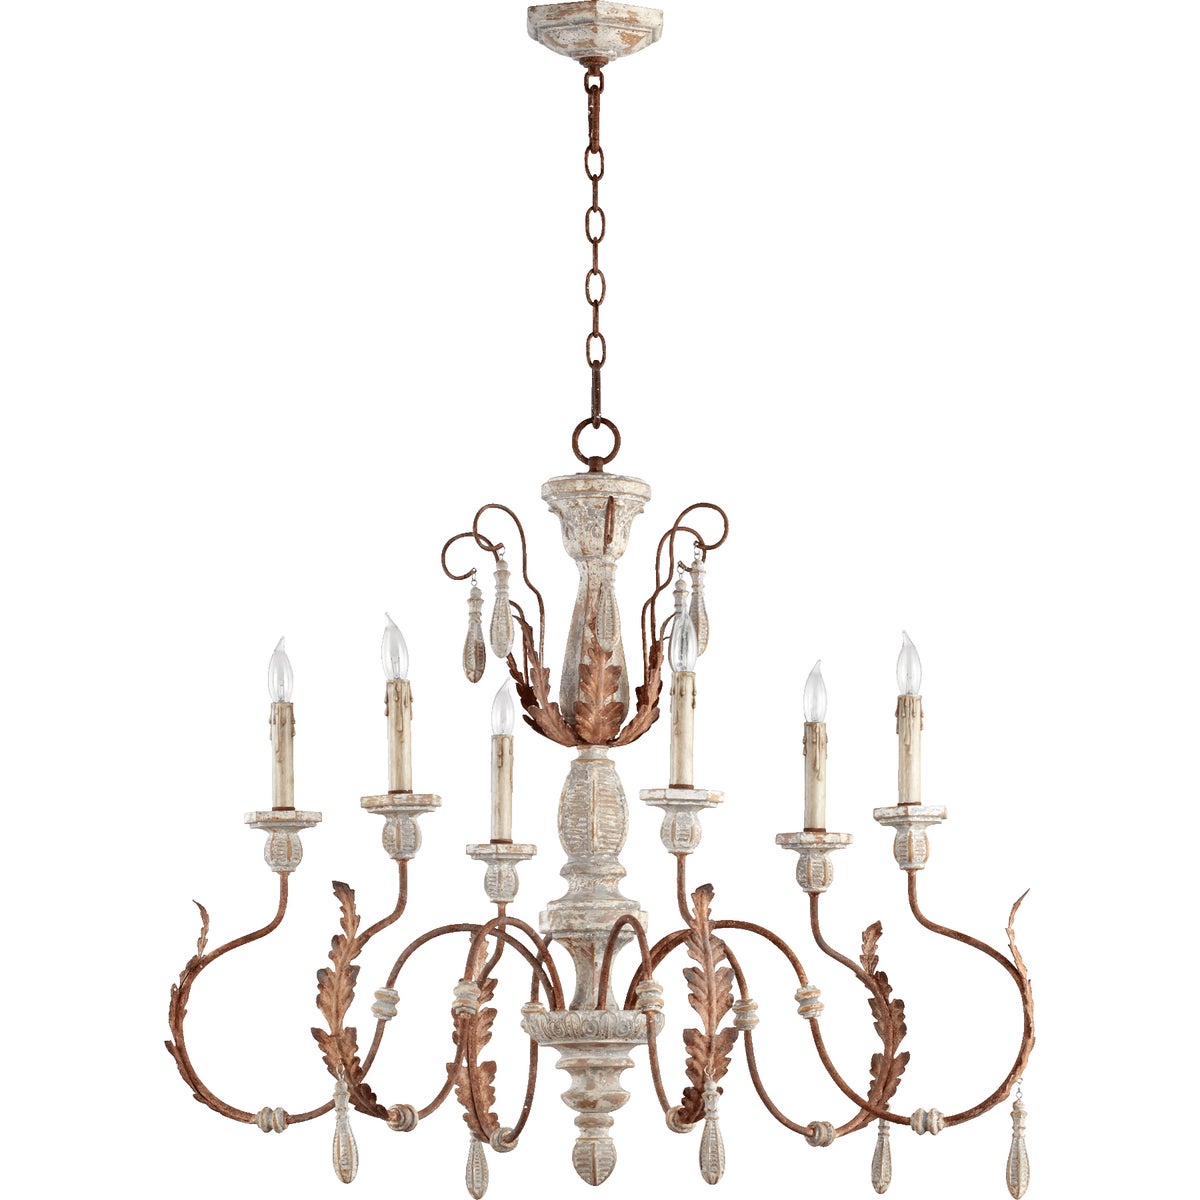 French Country Chandelier with rustic accents, reminiscent of 19th century bucolic France. Transparent frame, perfect for traditional or French country inspired spaces. 6-bulb ceiling fixture, Manchester Grey finish. 35.5"W x 30.5"H. UL Listed, Dry Location. 2-year warranty.